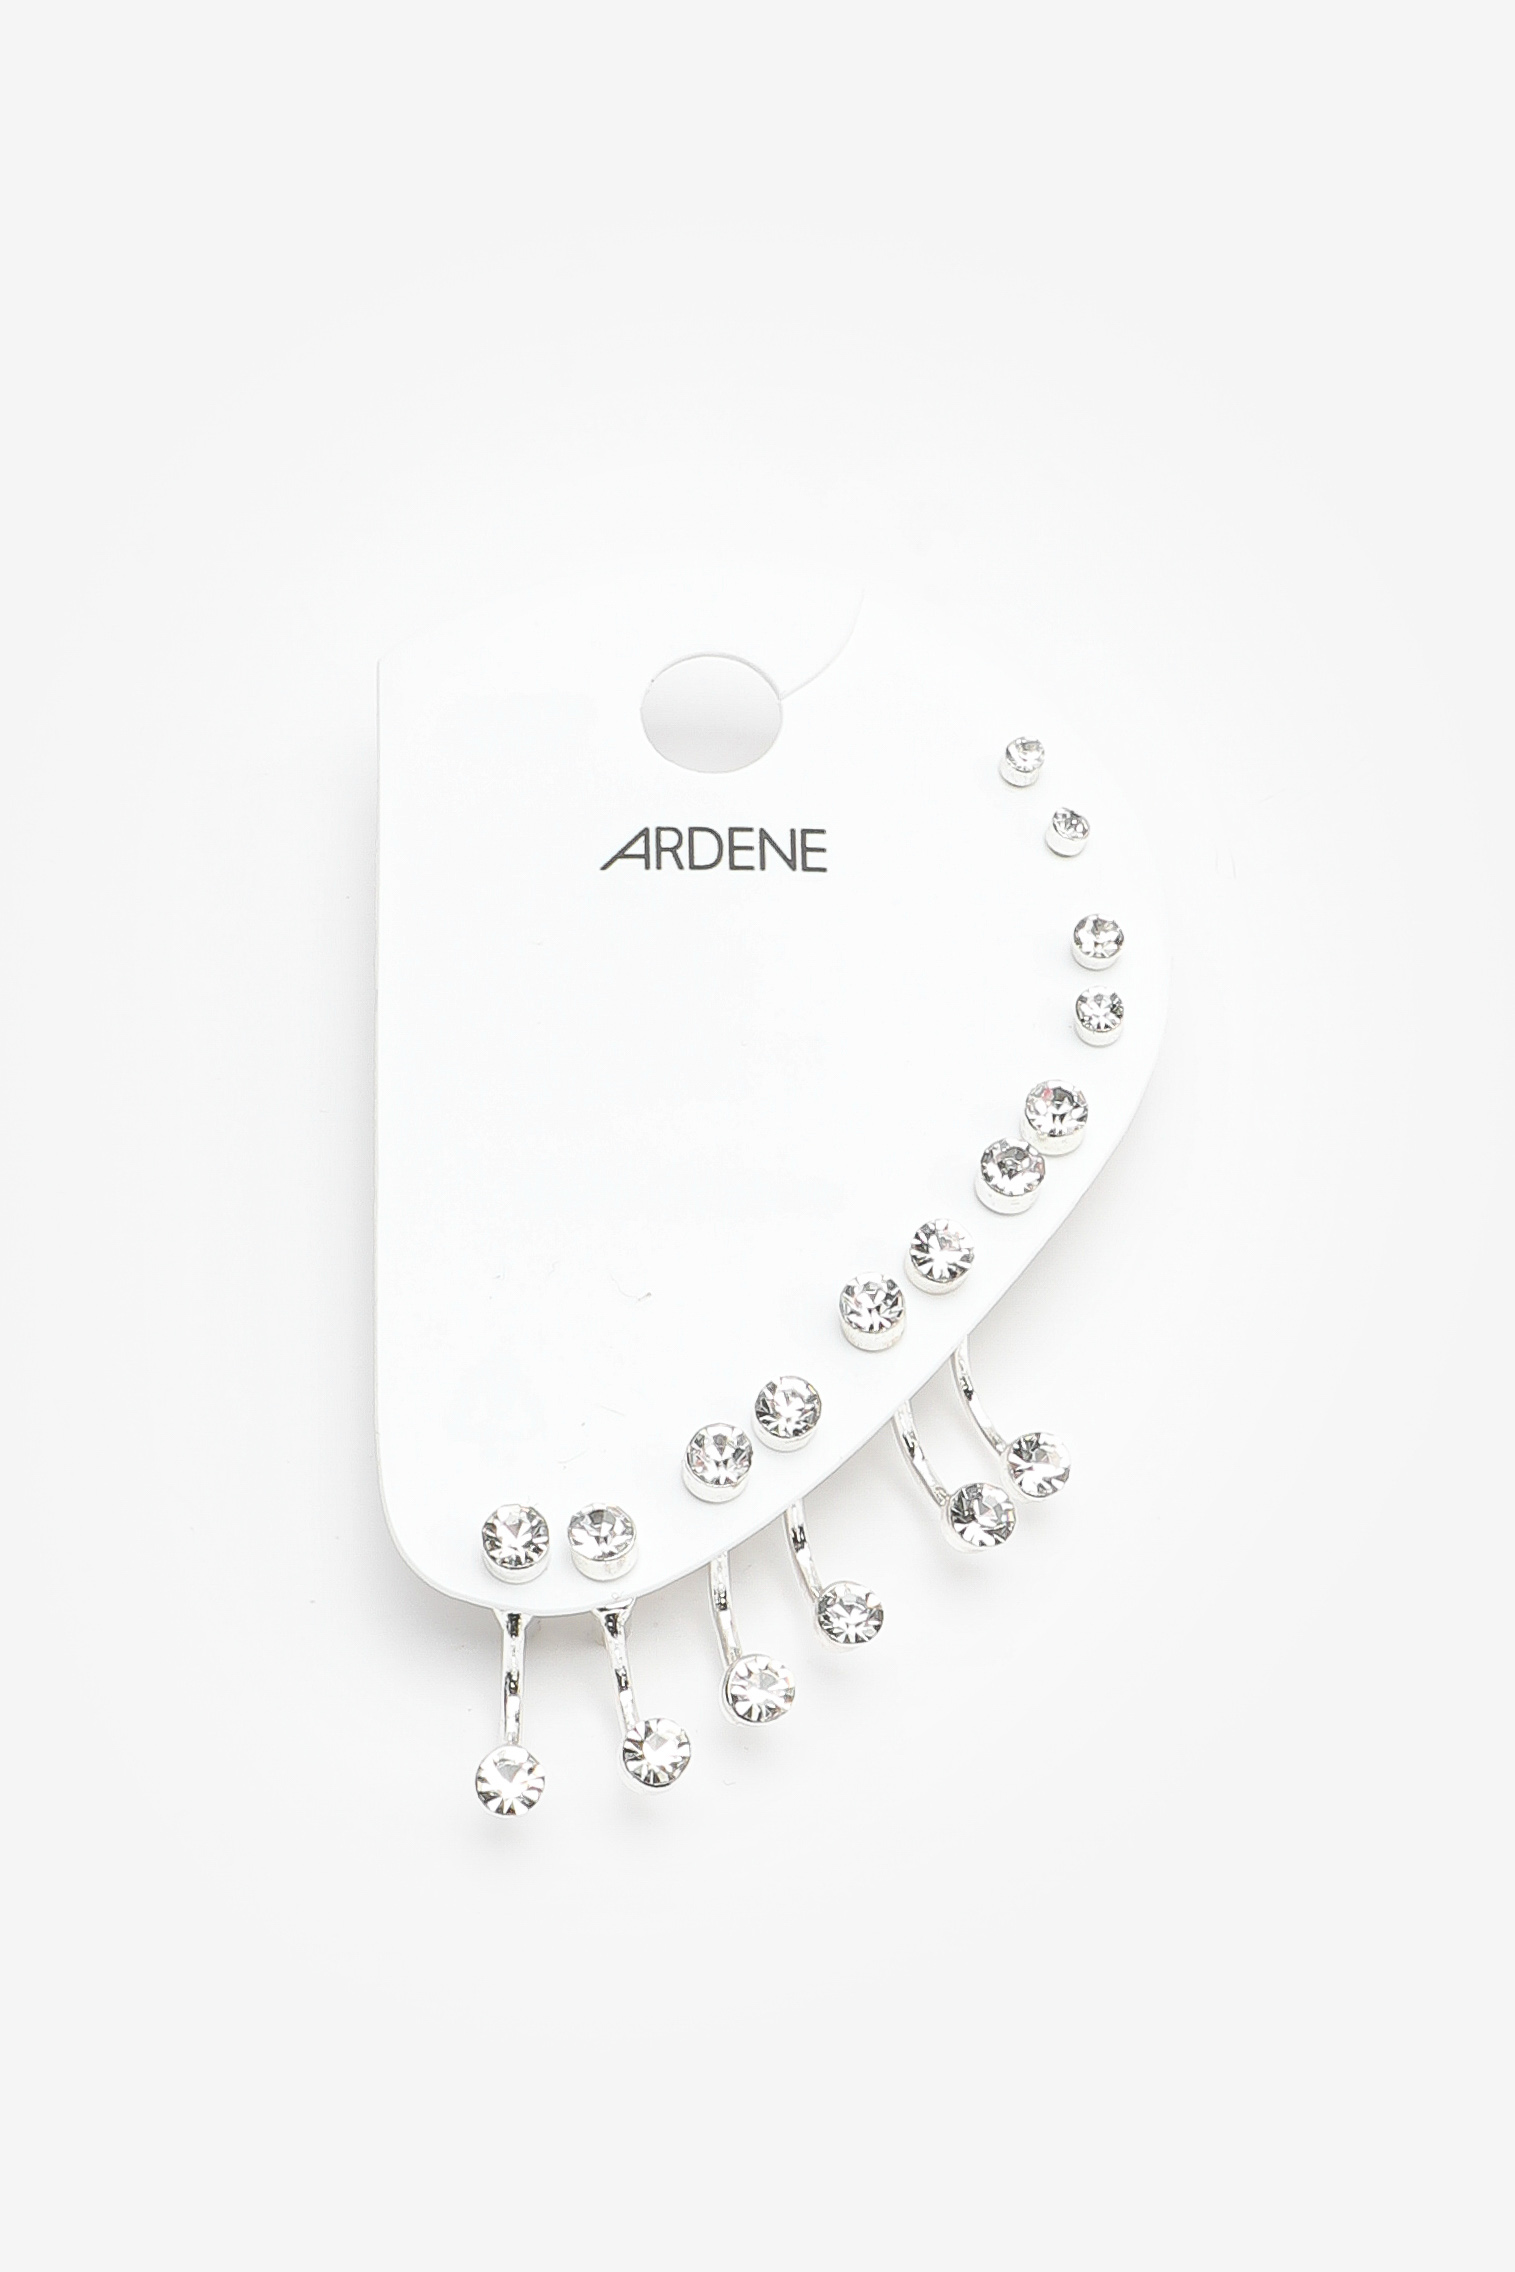 Ardene Pack of Round Stone Earrings in Silver | Stainless Steel